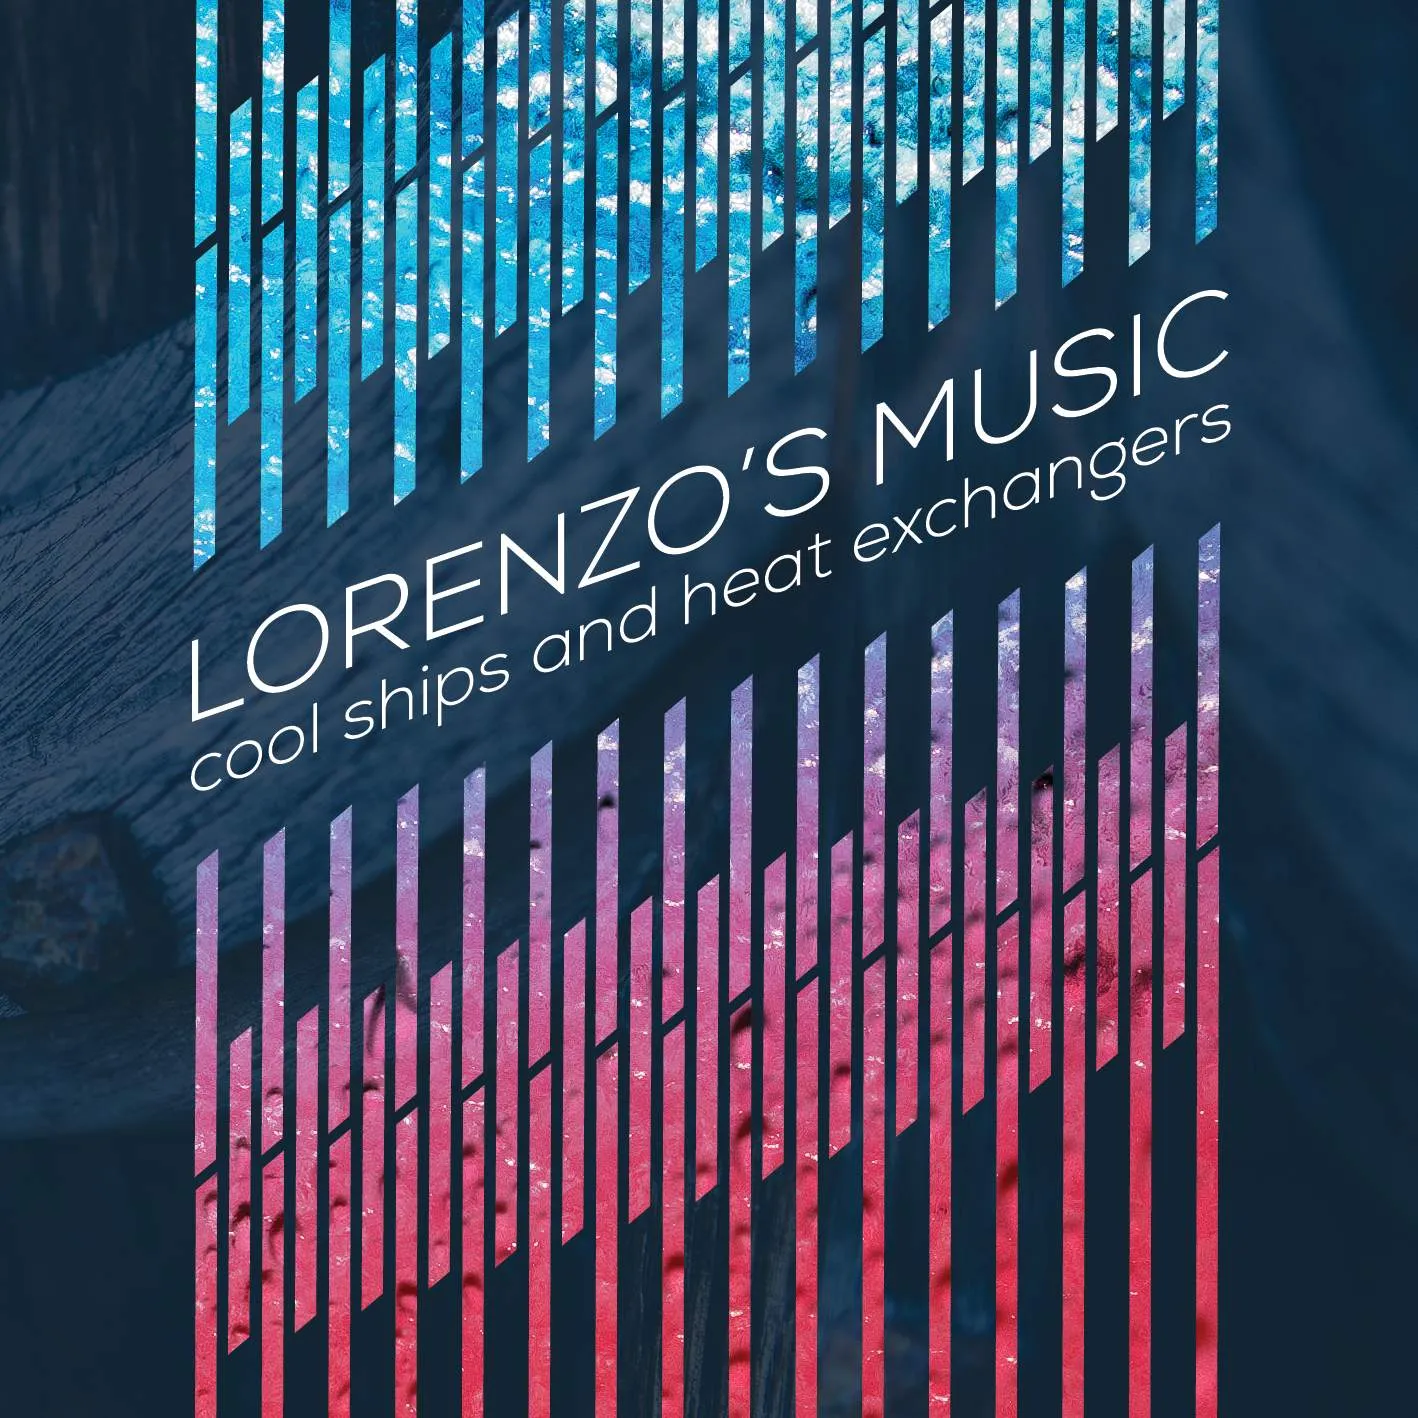 Album cover for “Cool ships and heat exchangers” by Lorenzo's Music